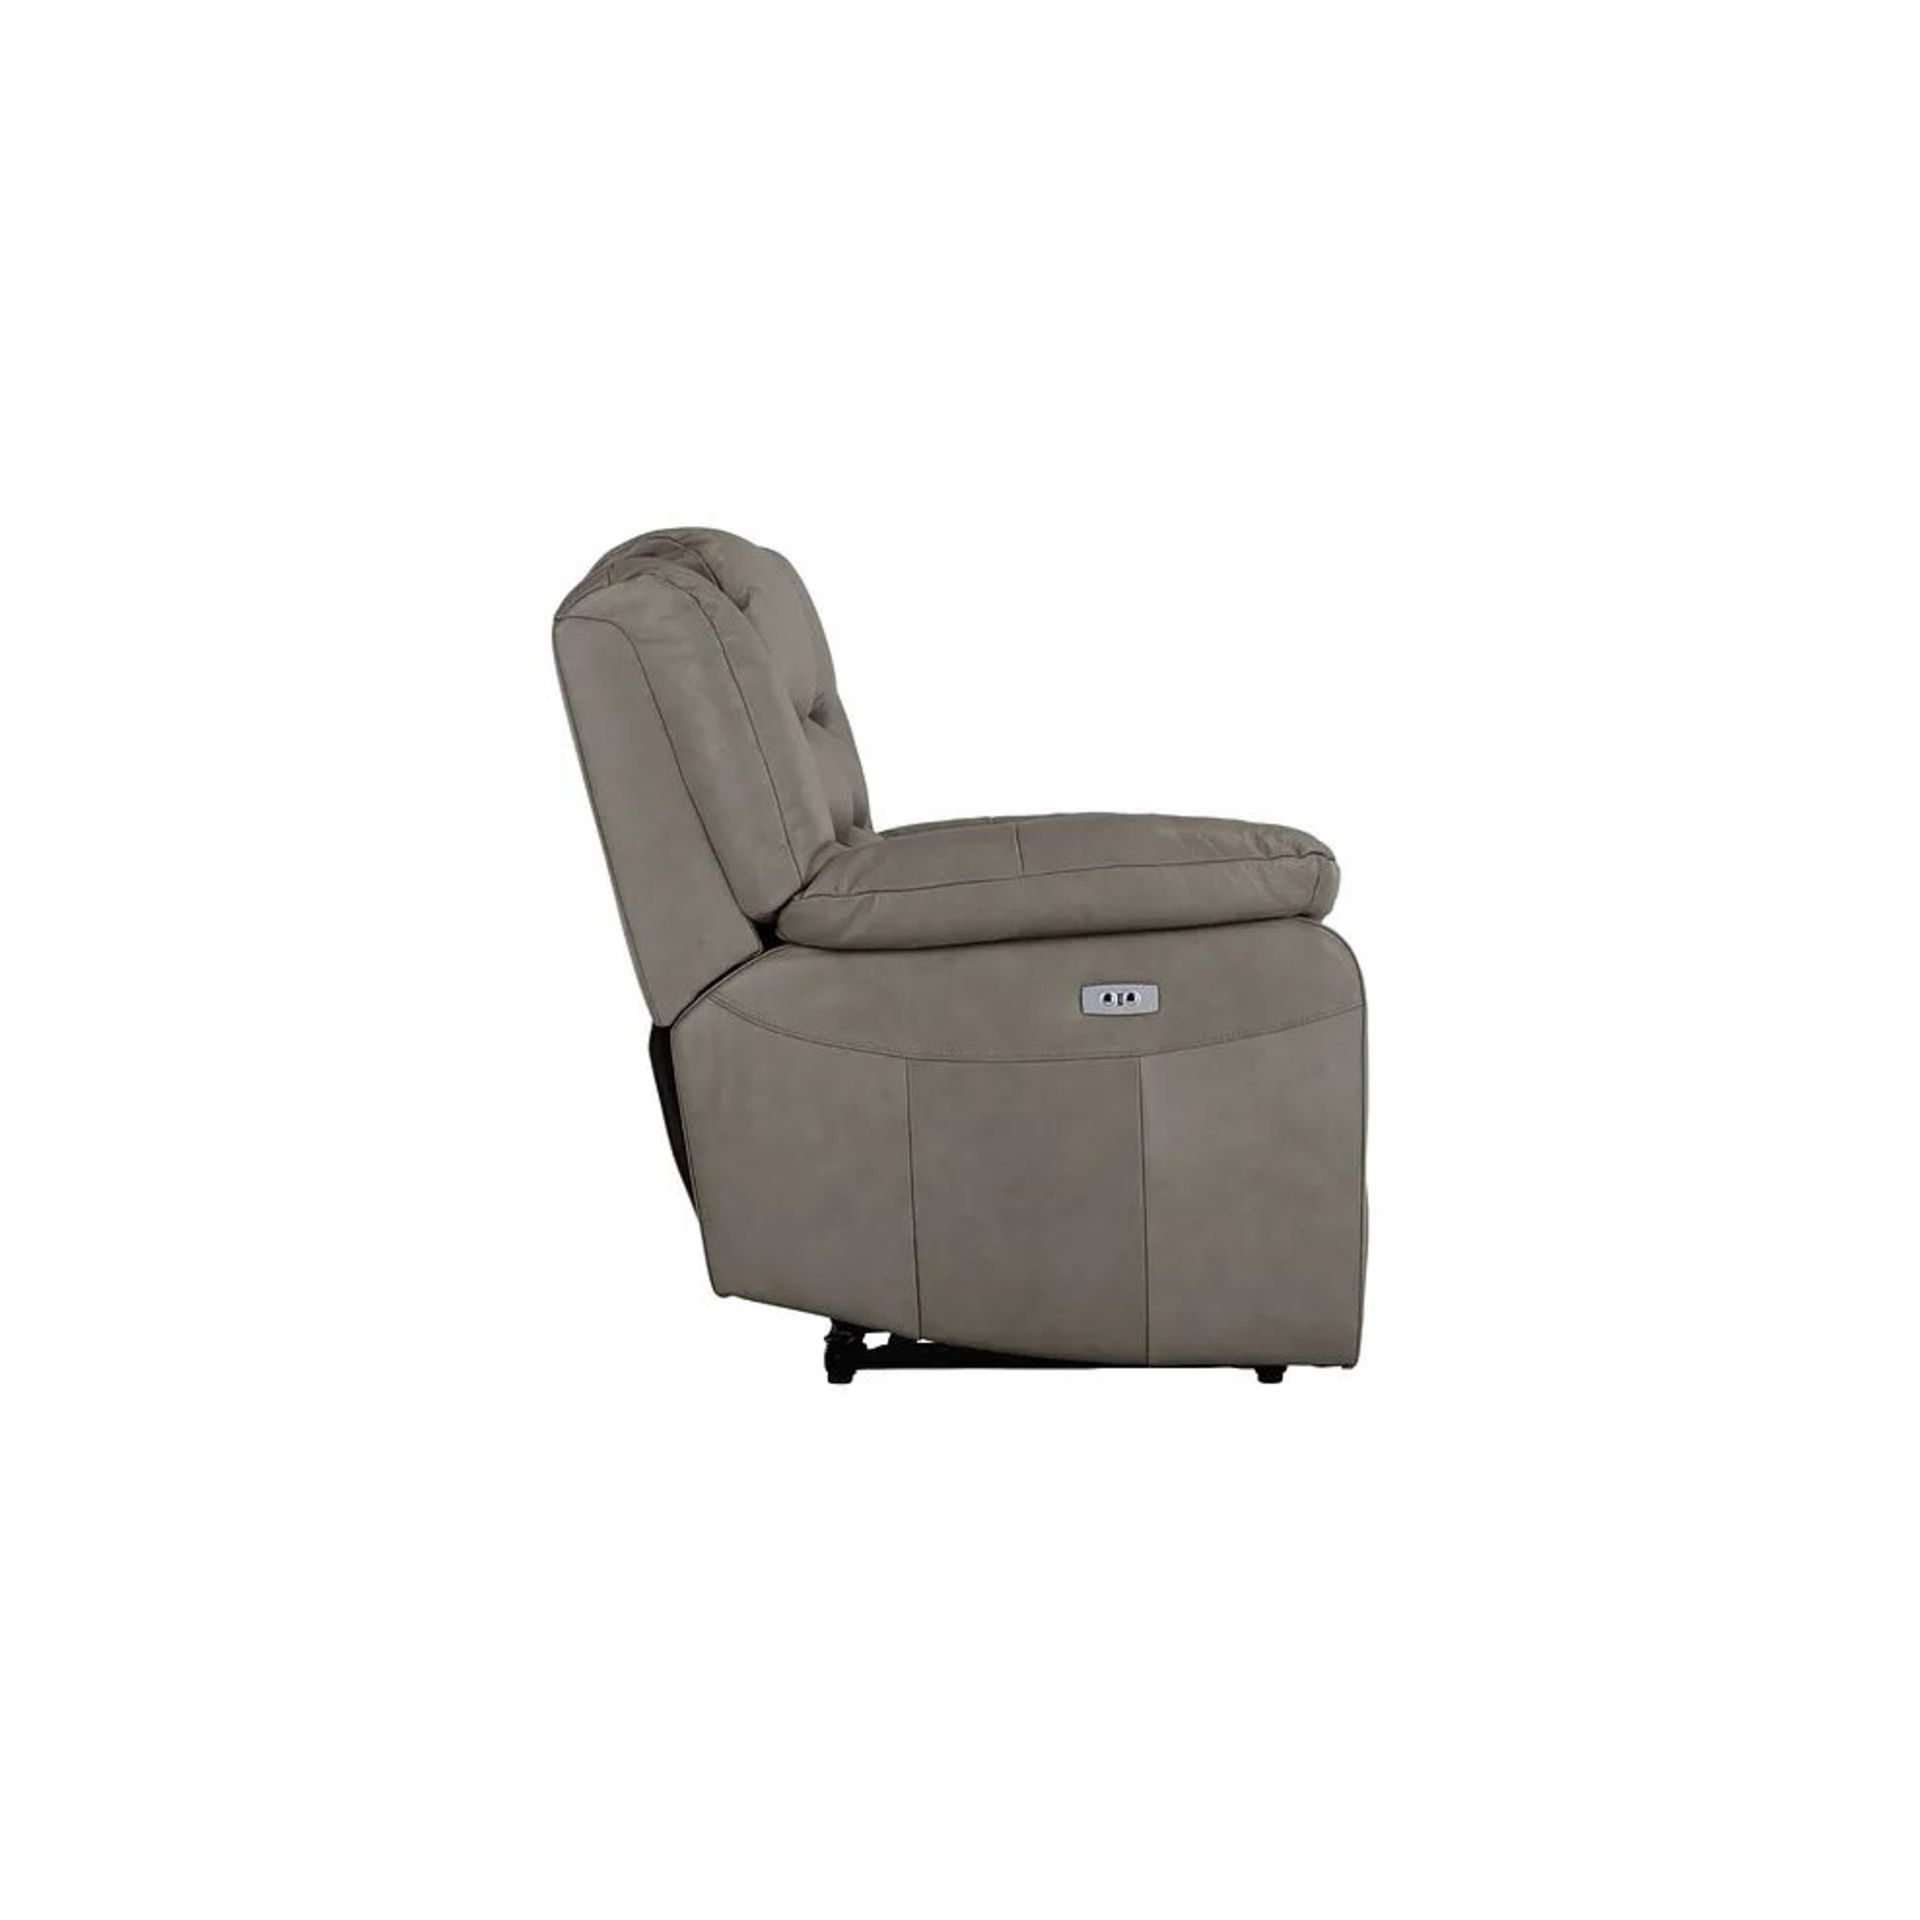 BRAND NEW MARLOW 3 Seater Electric Recliner Sofa - DARK GREY LEATHER. RRP £1849. Our Marlow - Bild 7 aus 11